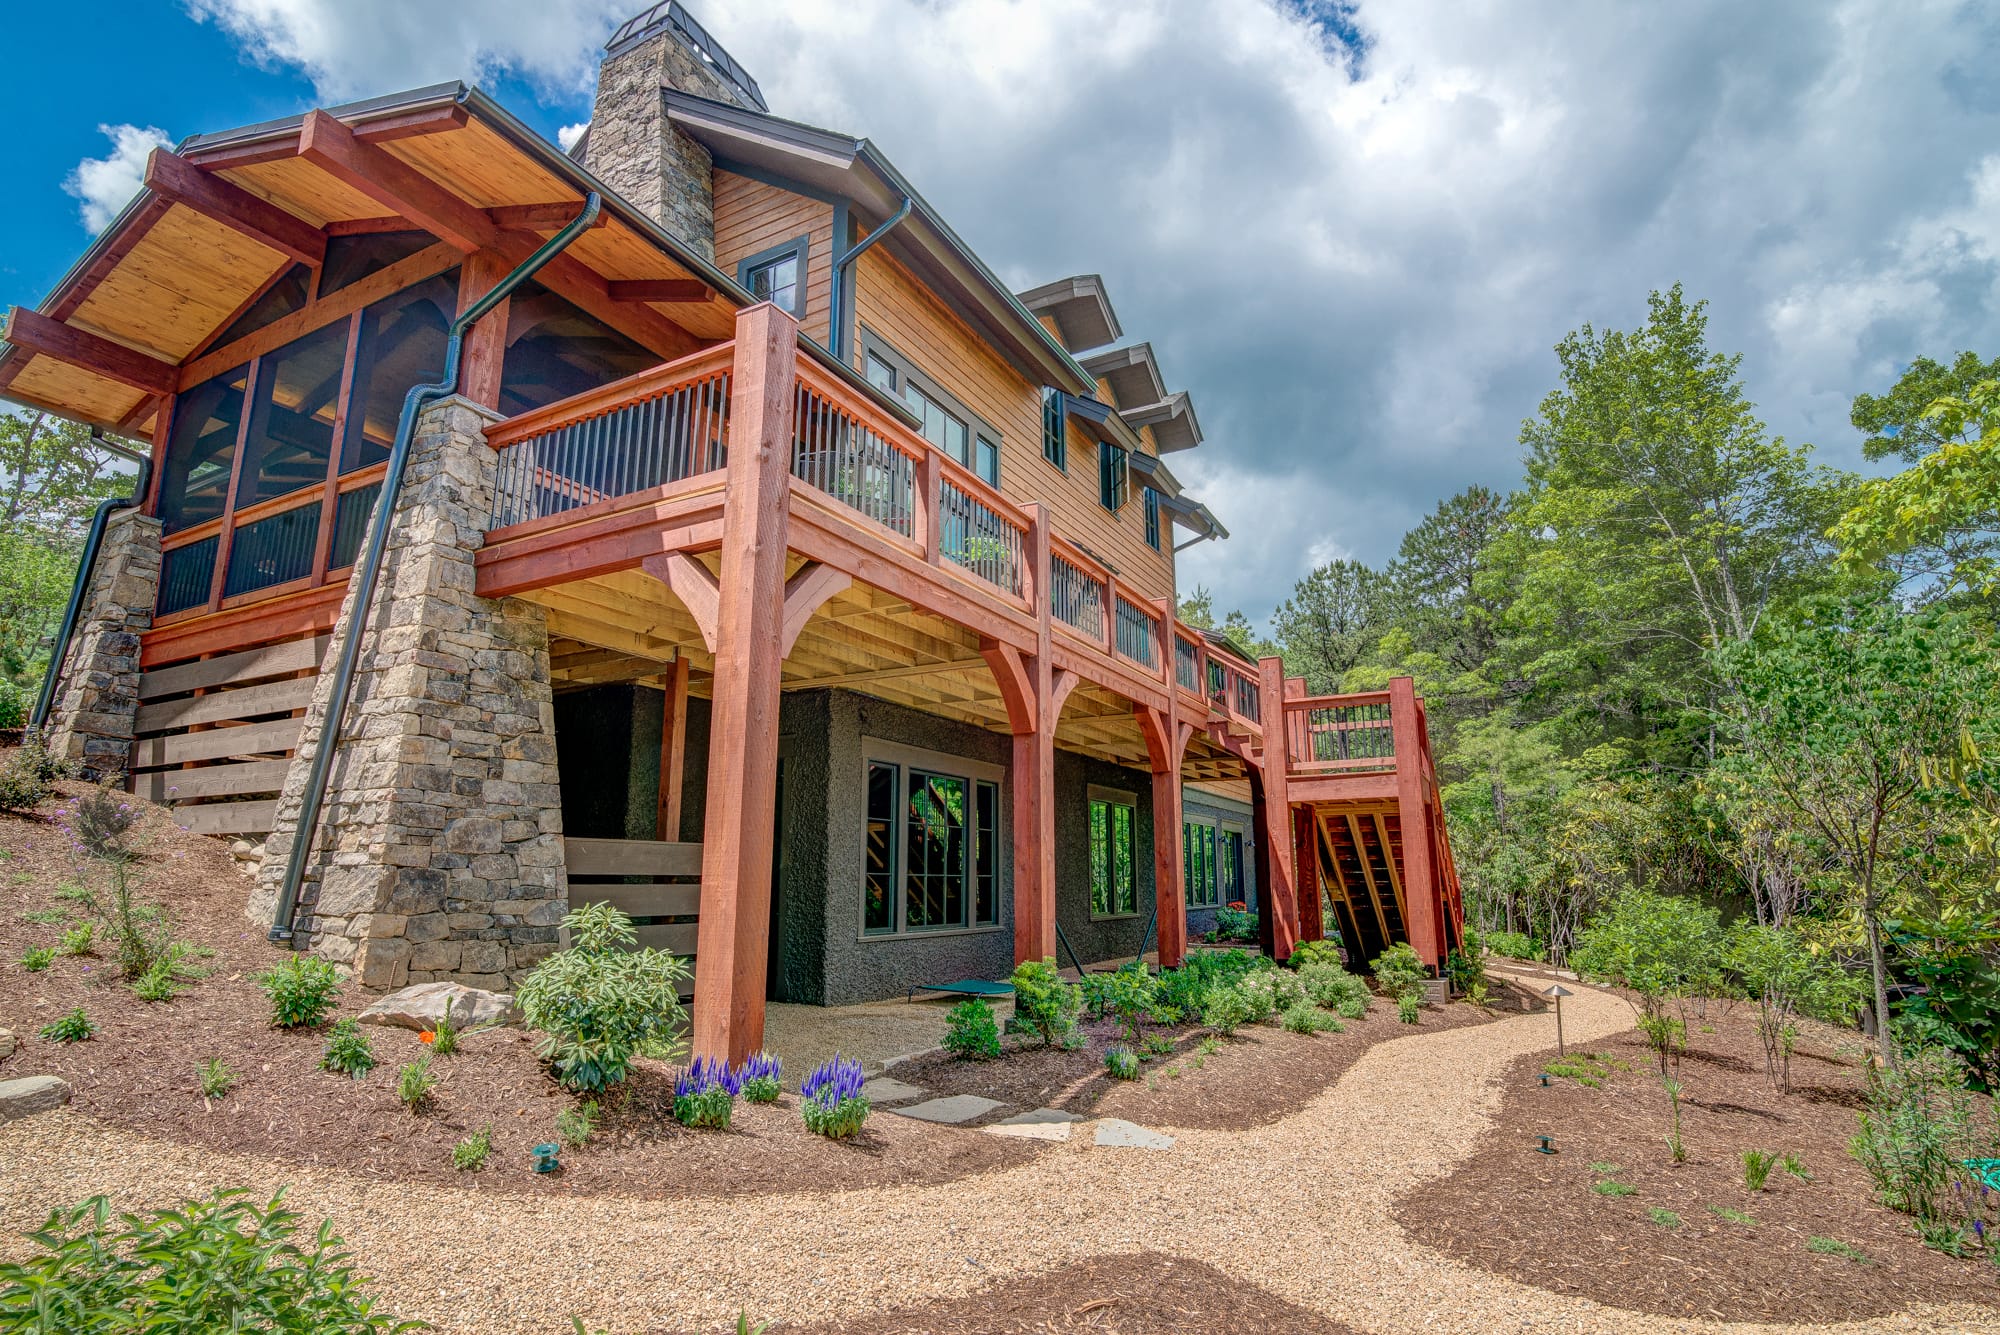 Pritchard-Hardin rear exterior with enormous second floor deck overlooking newly planted and manacured garden with scenic mountain view. Image courtesy NAHB Best in American Living.